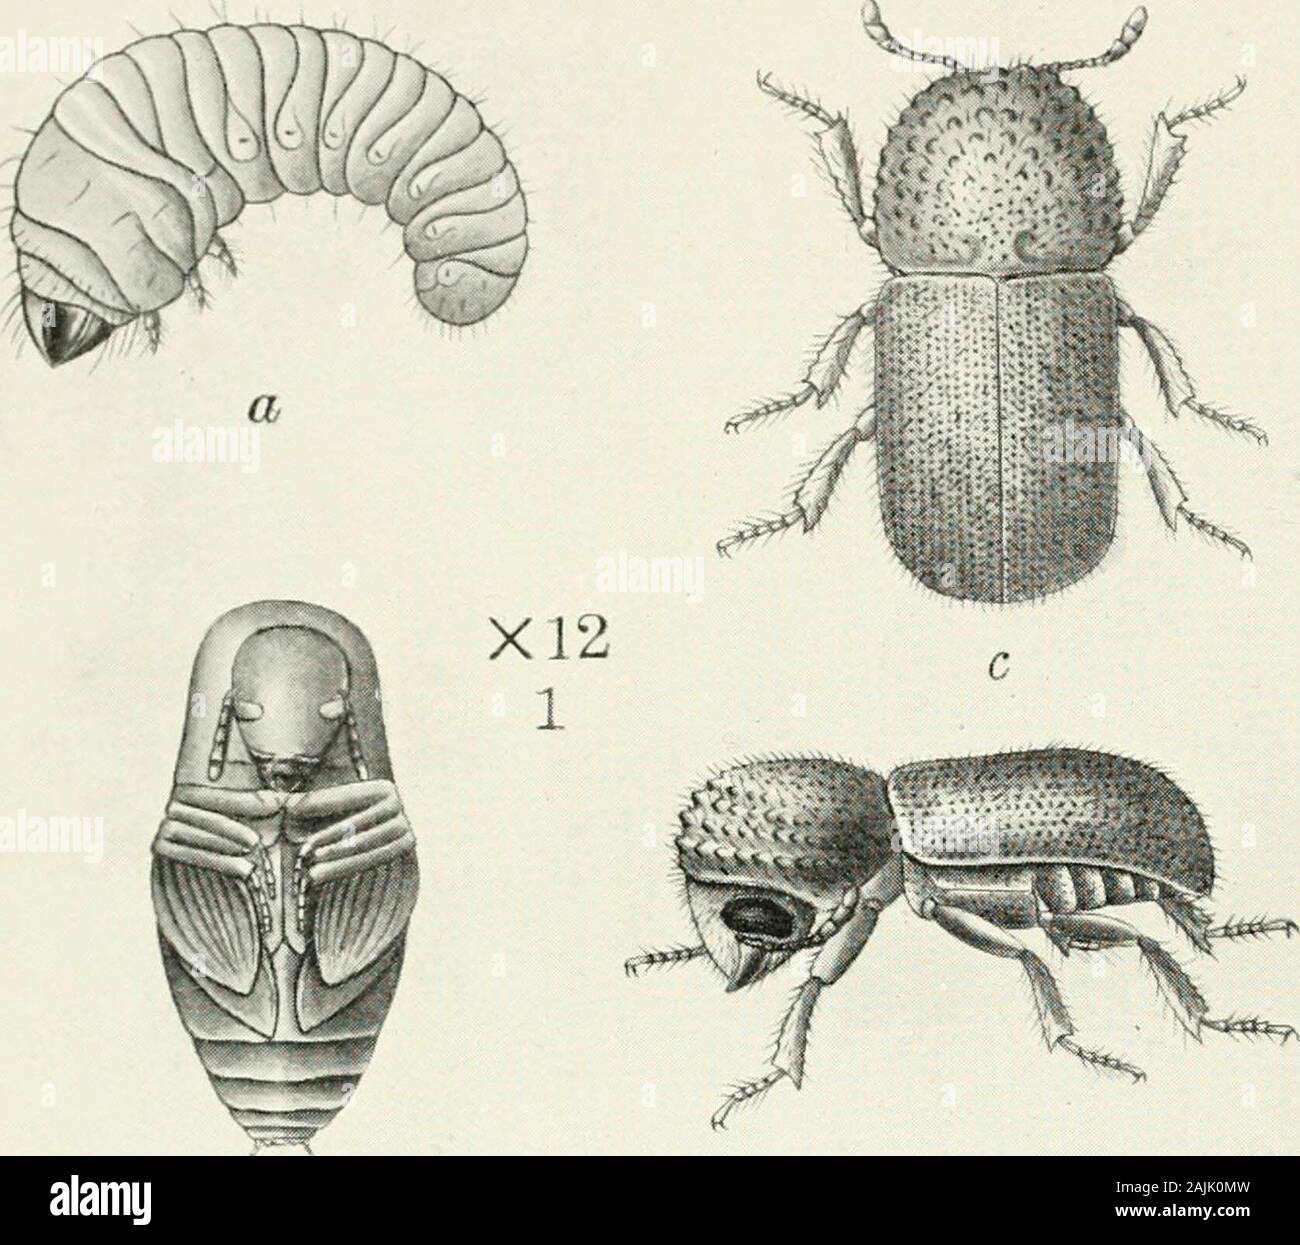 Indian forest insects of economic importance Coleoptera . V Tarsostenus univittatus, Rossi (p. 188) Elongate, narrow, rather flat. Black, shining; elytra crossed just above the middle by a trans-verse half-moon shaped band which does not Predaceous Insects. quite reach suture. Head finely punctate. Pro-thorax rather flat, impressed medianly, the punc-FlG. 91. tures lar&er tnan on head, but rather scattered. Elytra with sides parallel, Tarsostenus uiii- Apices separately rounded, pygidium exposed ; the basal half impressed^•vittatus, Rossi, with rather deep punctures arranged in longitudinal pa Stock Photo